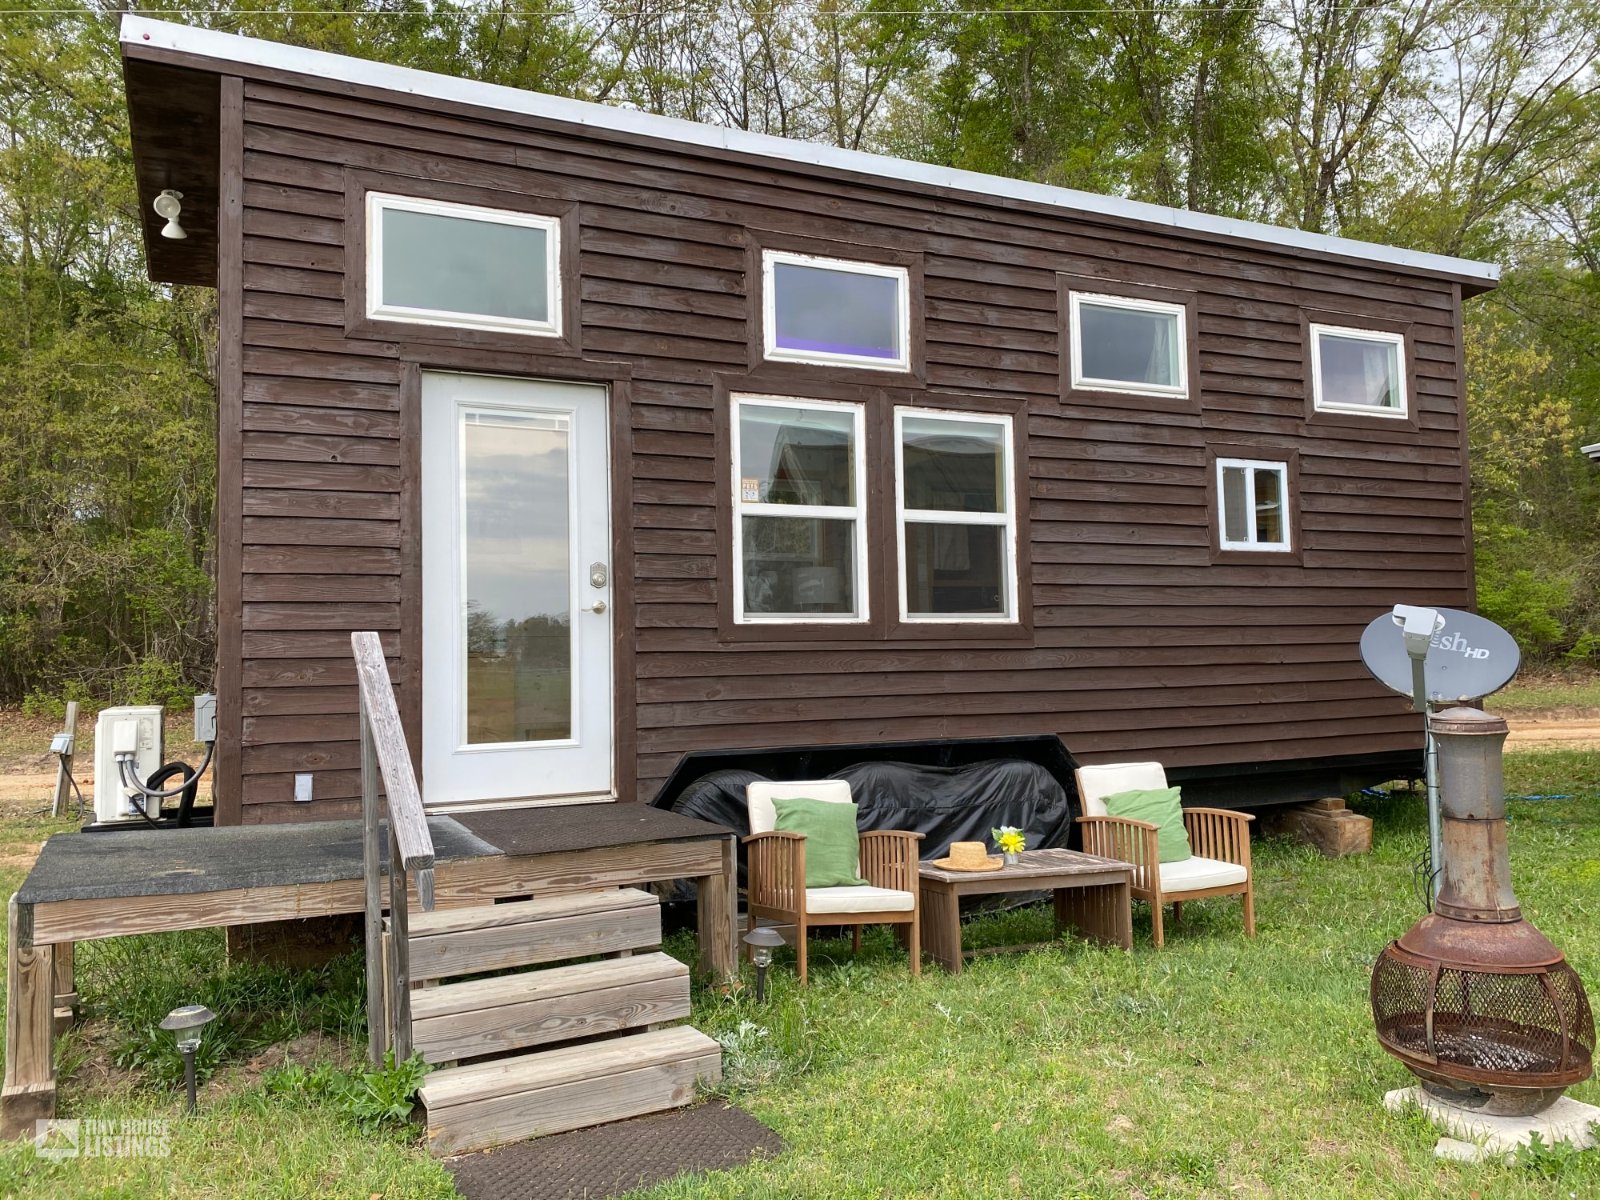 Tiny Home on Wheels in Danville, Georgia